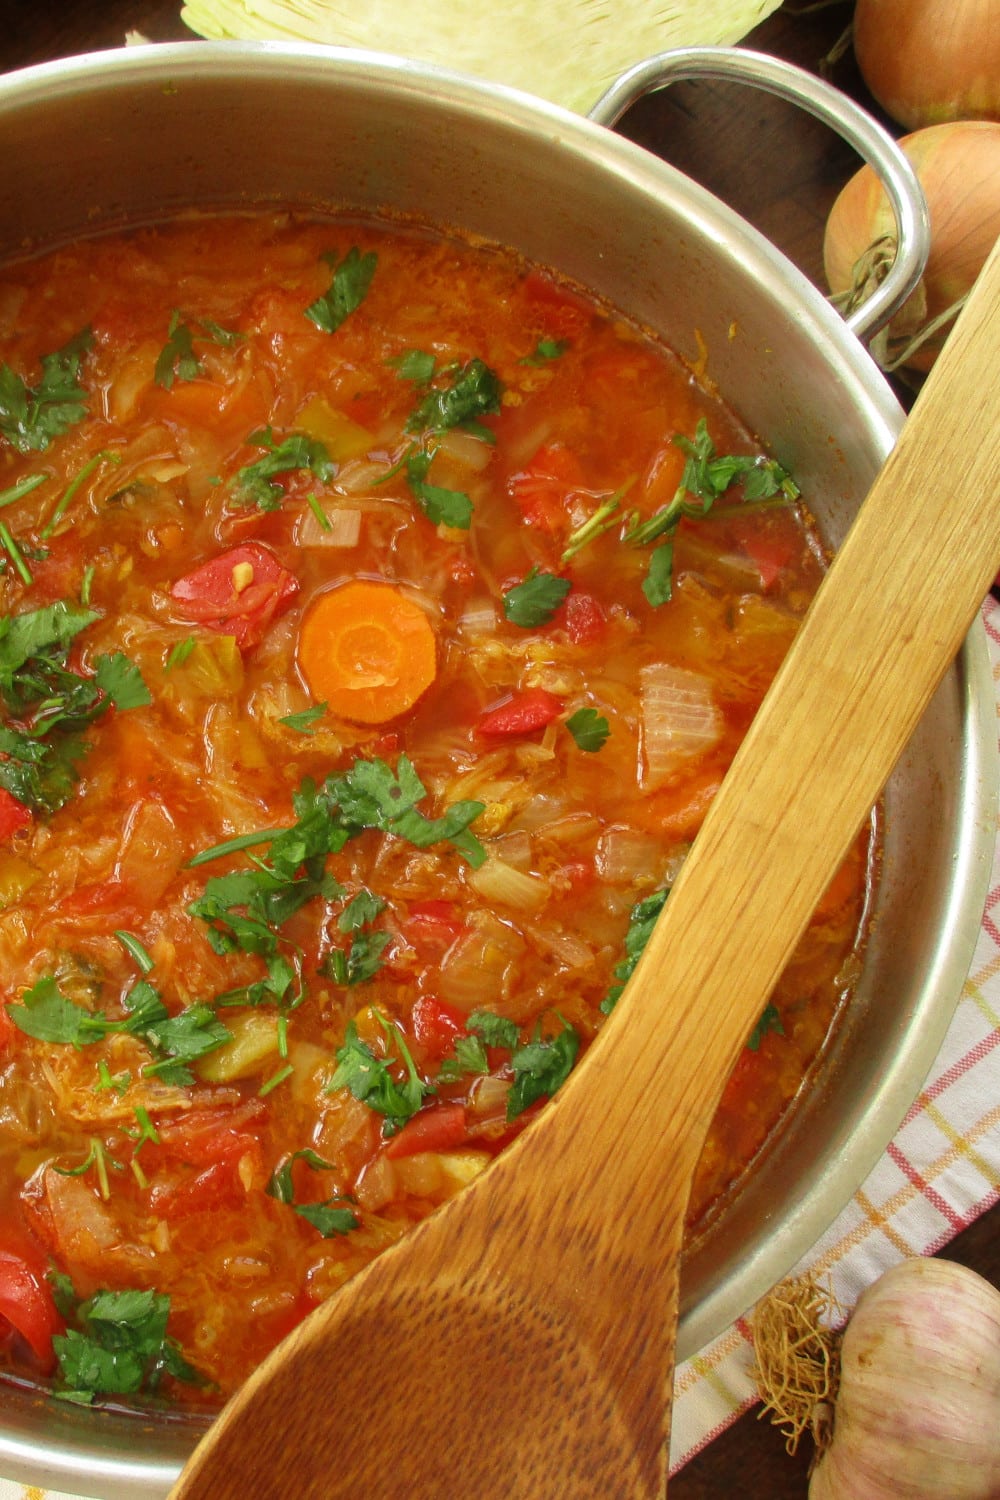 Cabbage soup in large pot with ladle, carrots, onion, pepper and garlic on the kitchen towel